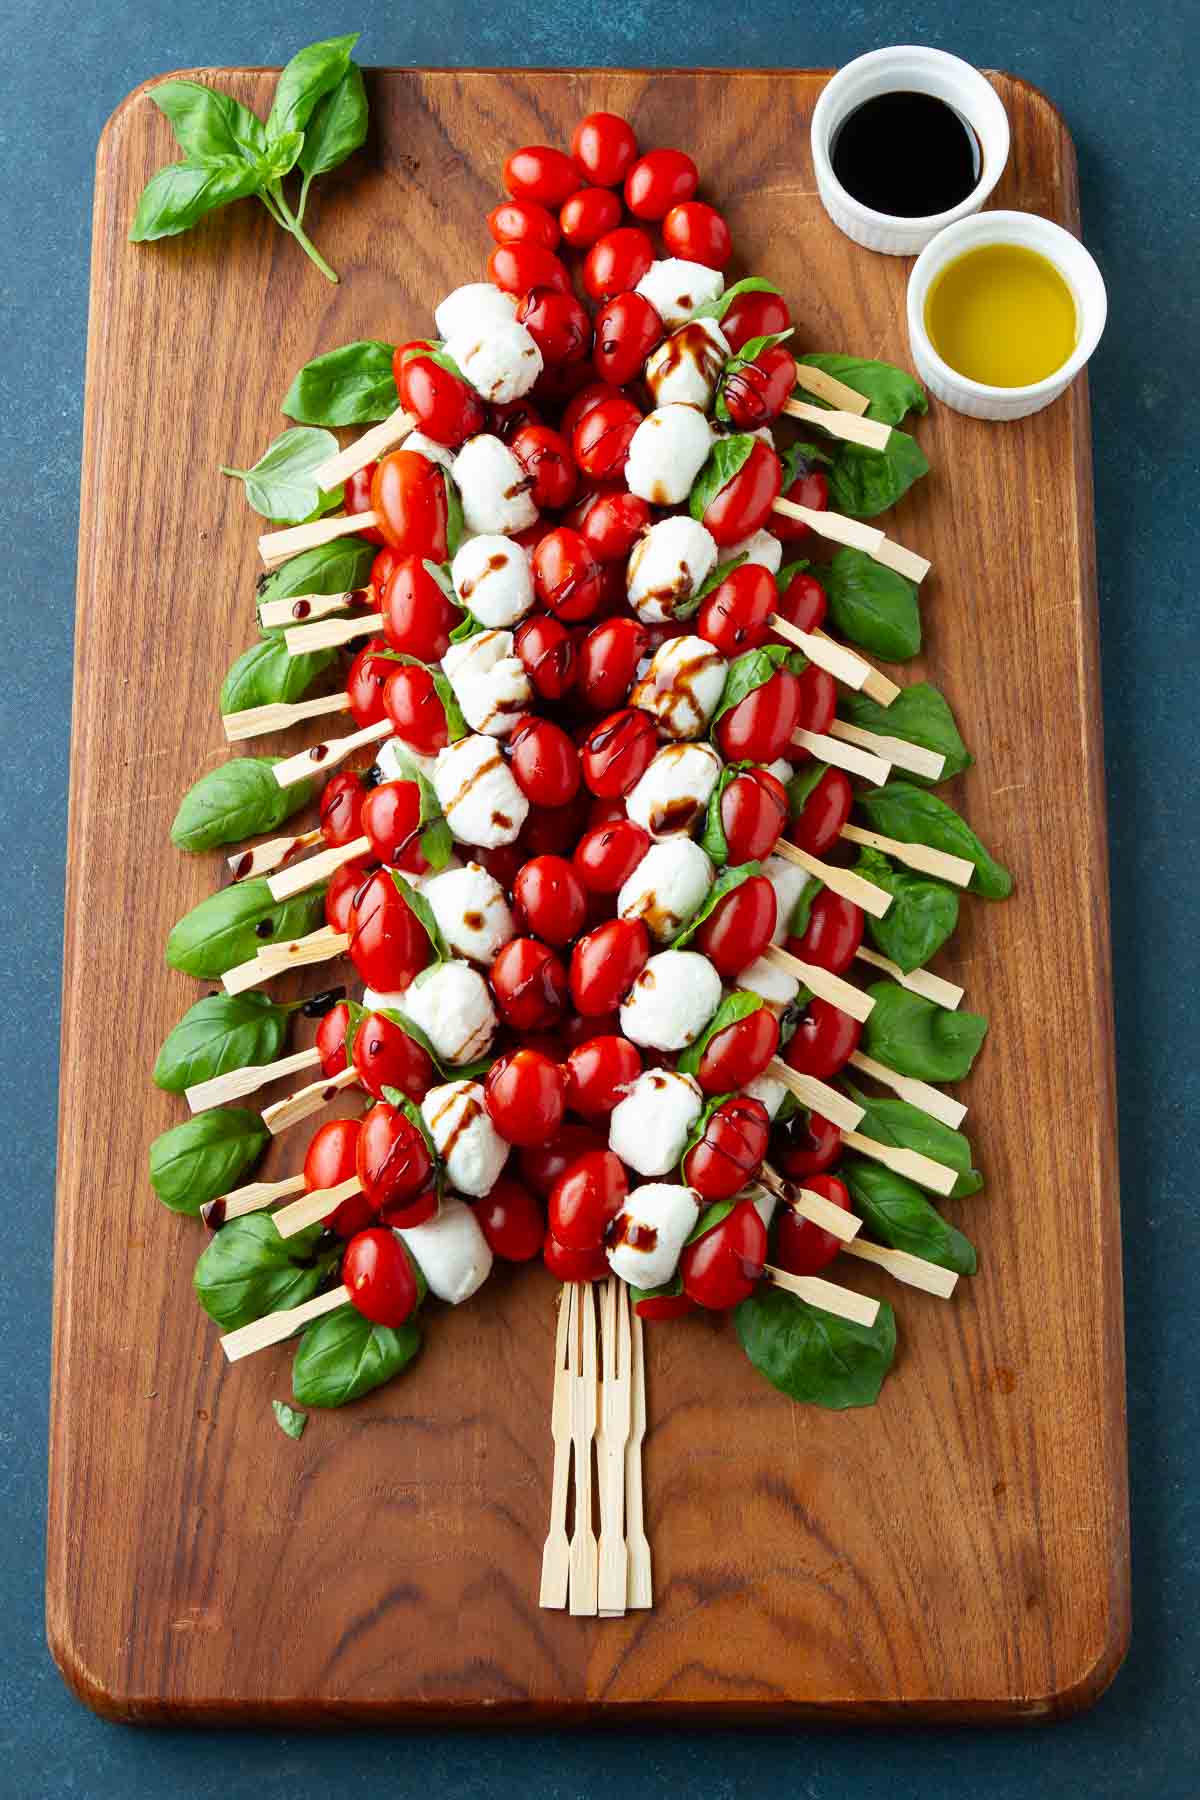 Caprese skewers arranged in the shape of a Christmas tree, on a wood board.